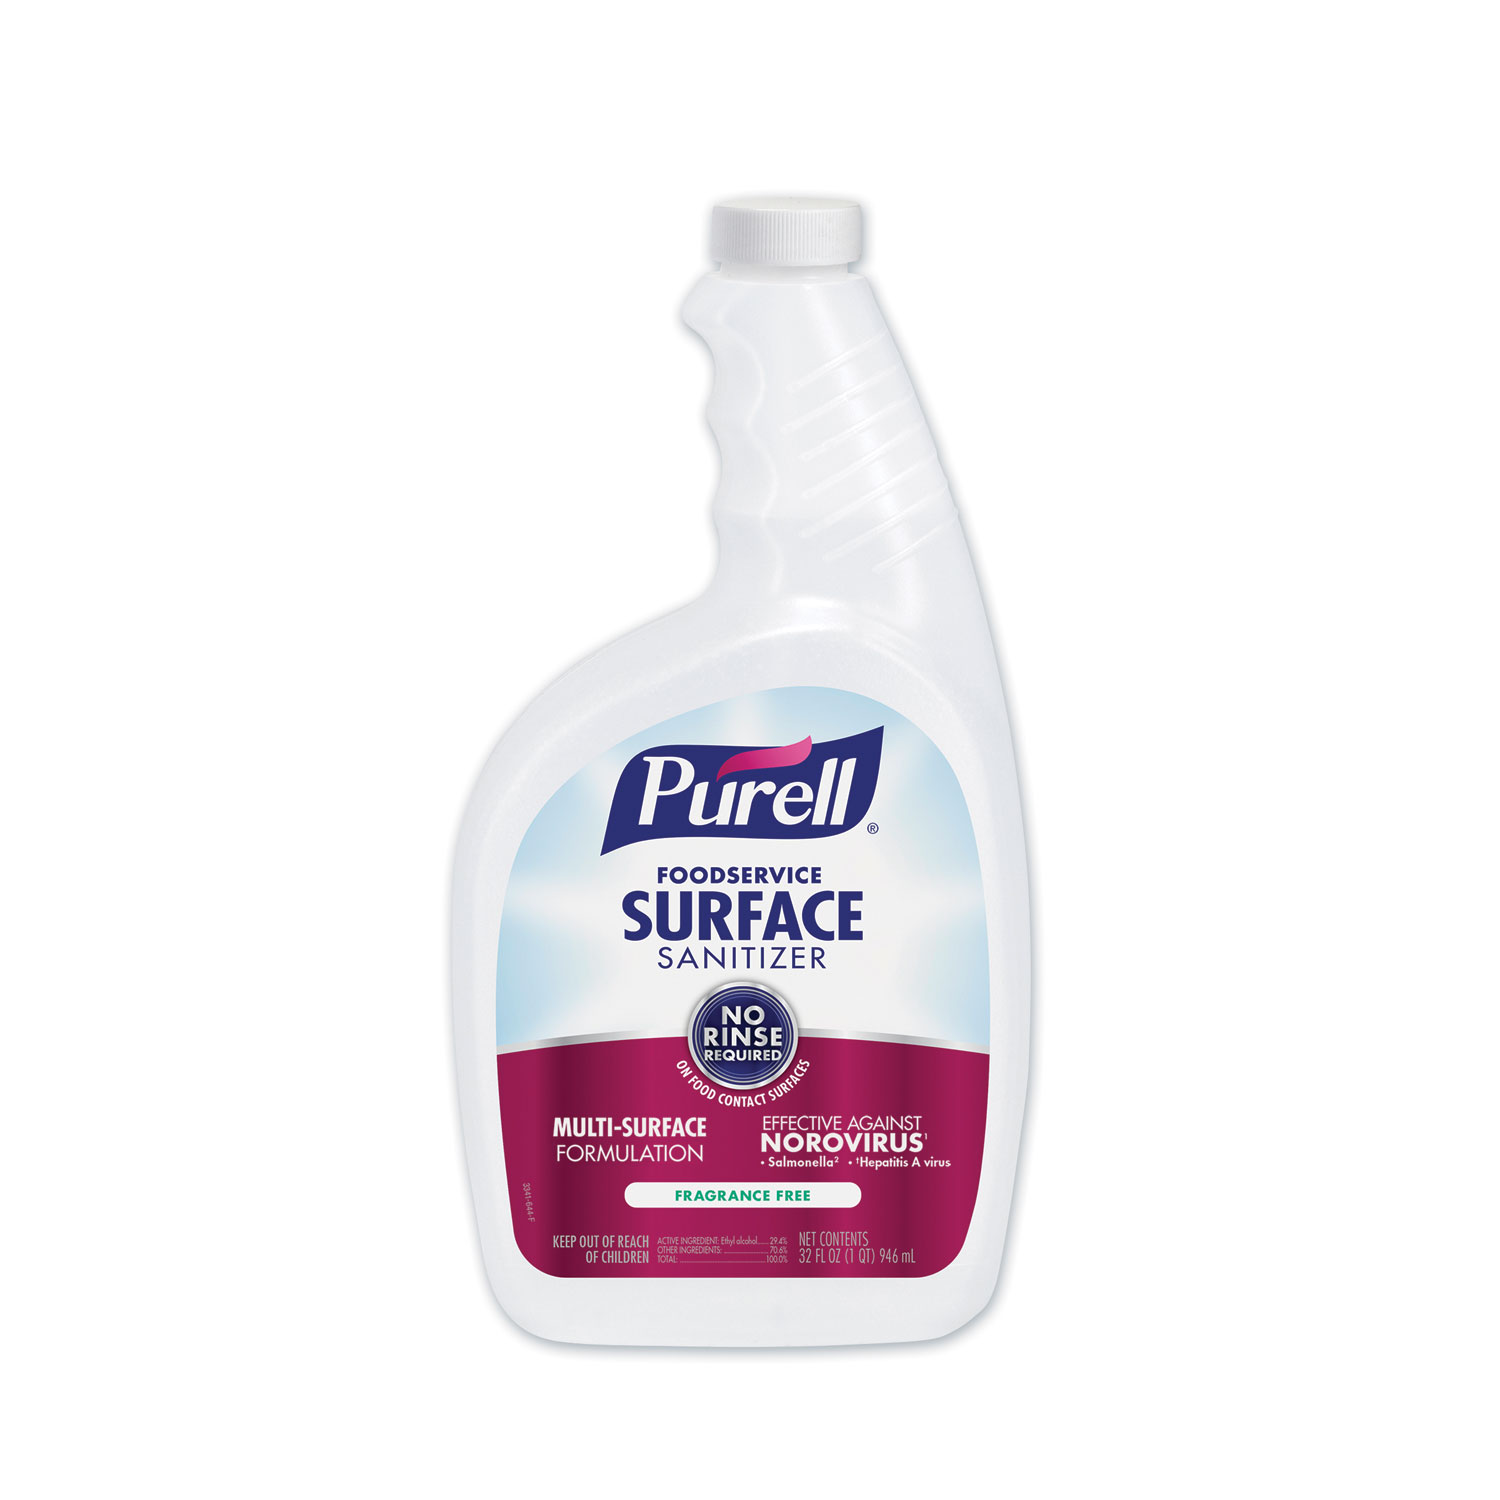  PURELL 3341-06 Foodservice Surface Sanitizer, Fragrance Free, Capped Bottle with Spray Trigger, 6 Bottles and 2 Spray Triggers/Carton (GOJ334106CT) 